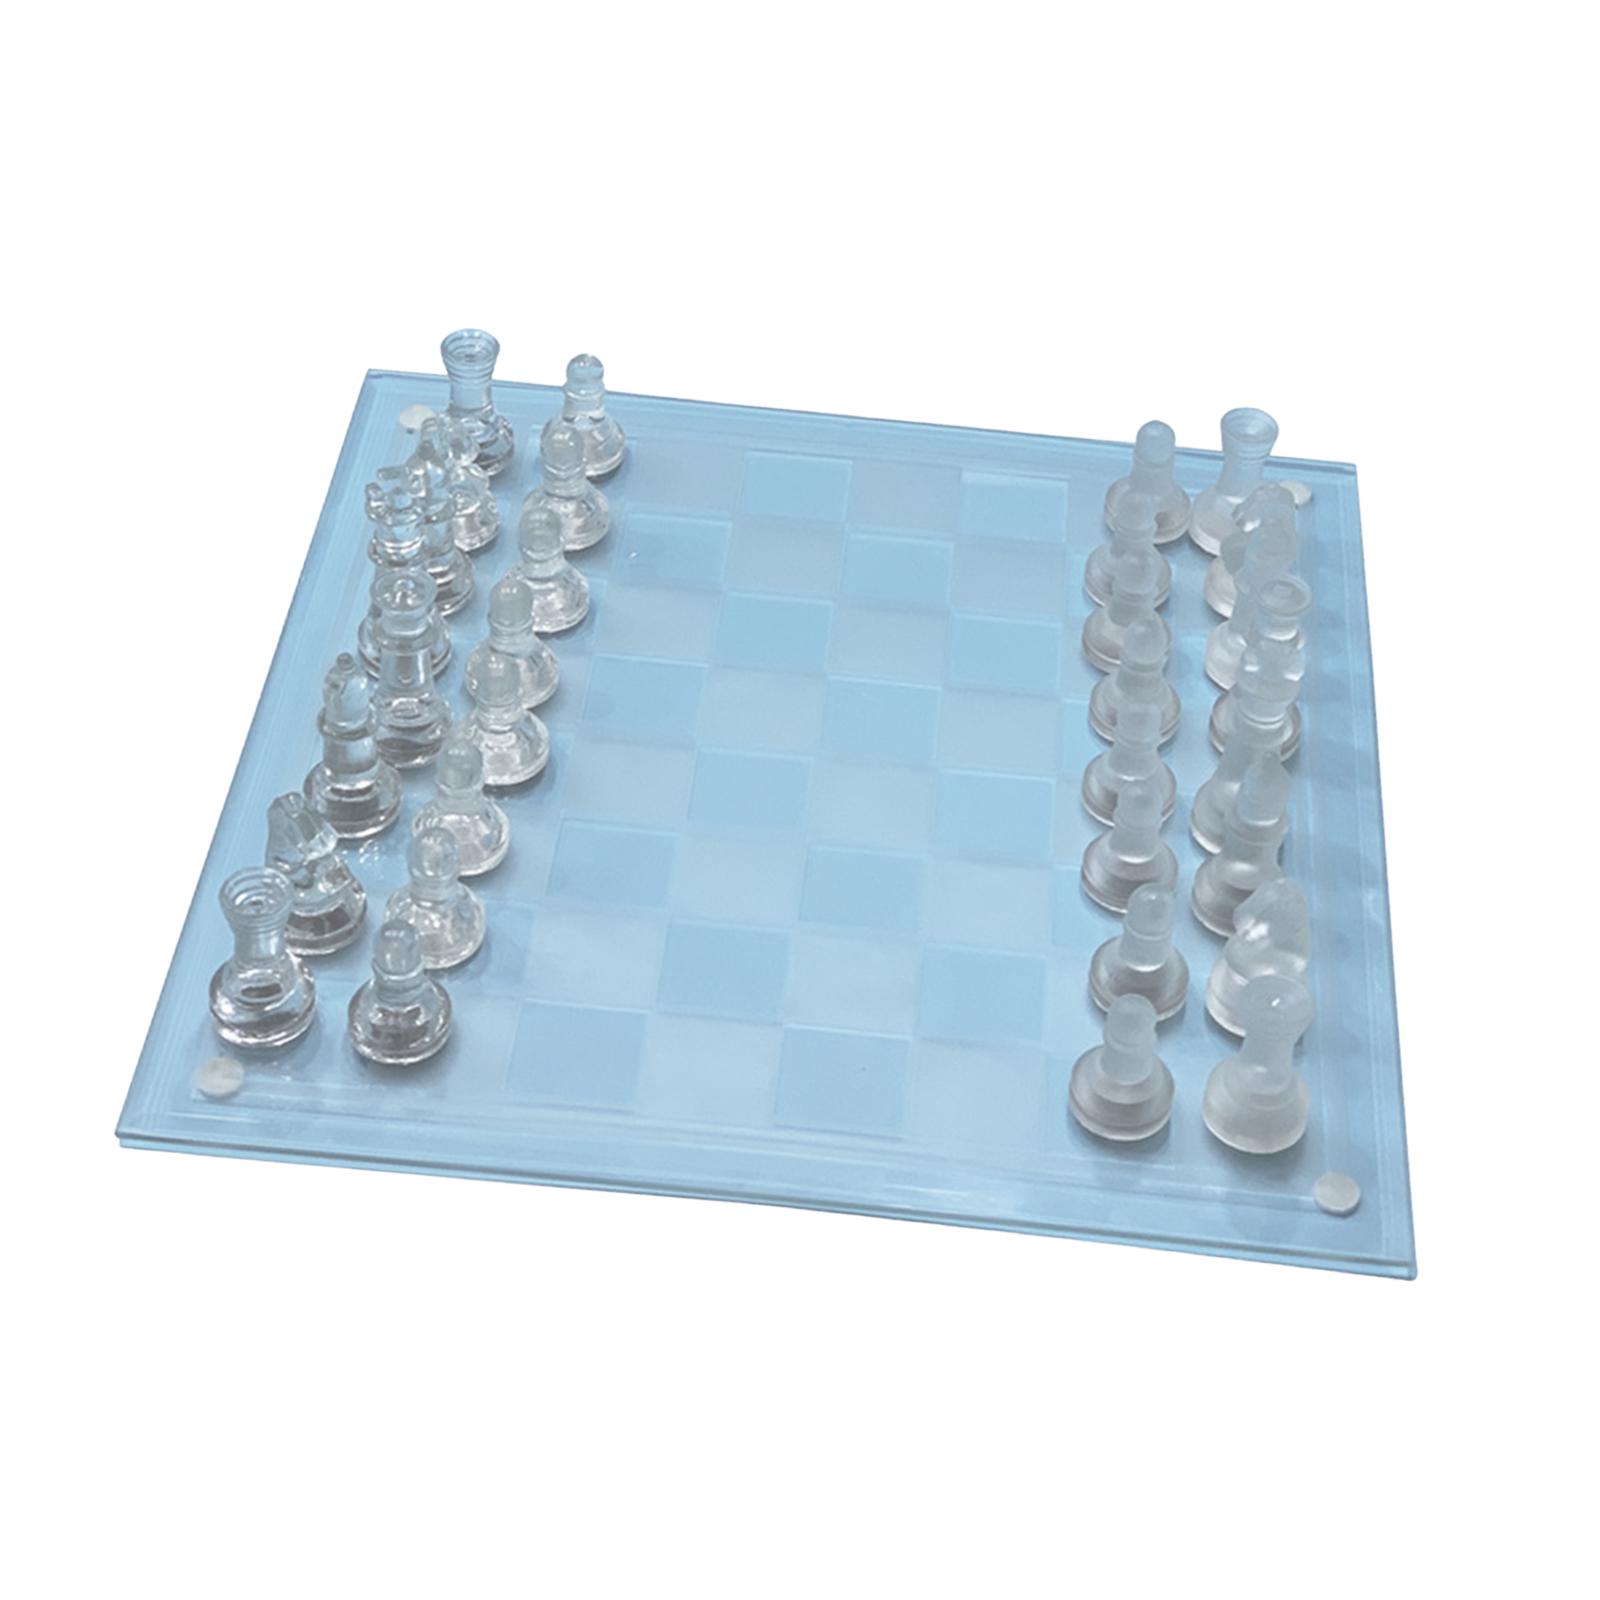 Glass Chess Game, Crystal Chess Board, Adults Play Set, Frosted Chess Board Set, Classic Strategy Game for Party, Interaction Activity Festival - image 1 of 8